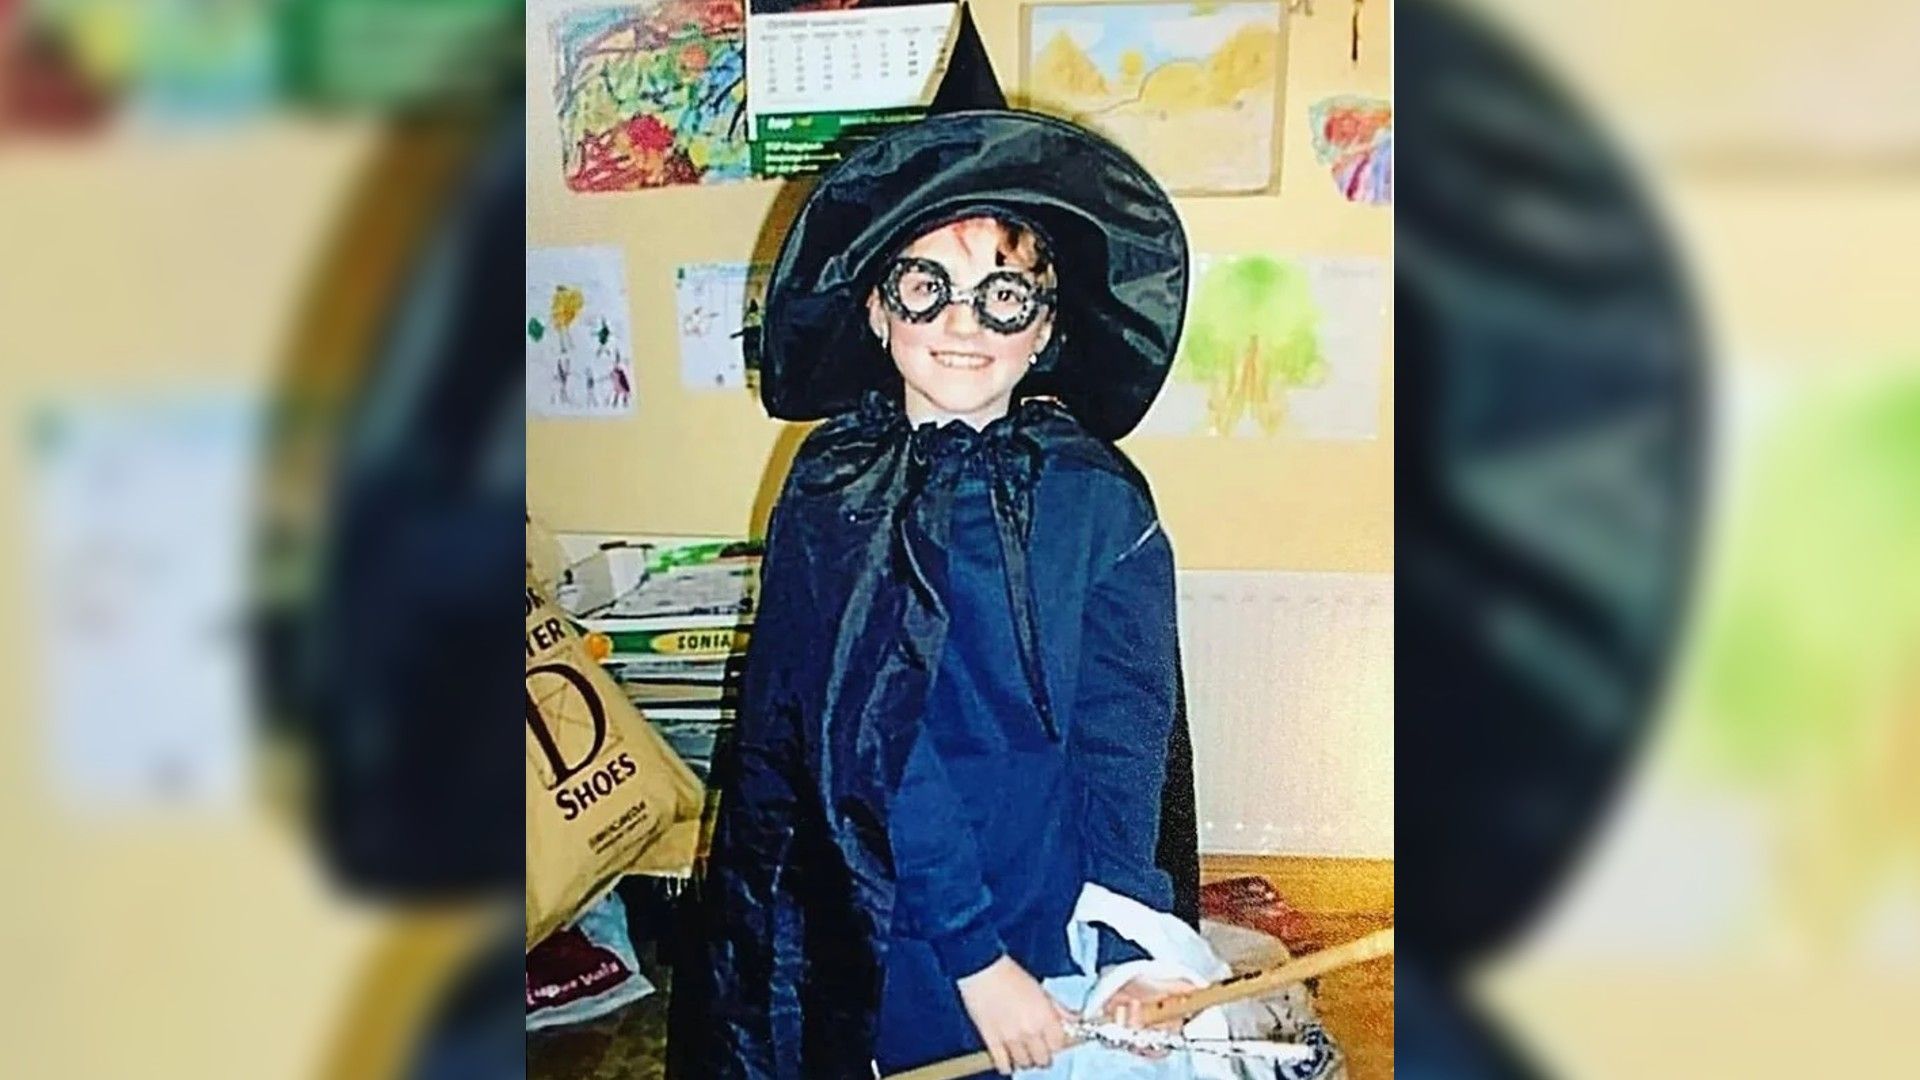  Evanna has loved the Harry Potter since childhood